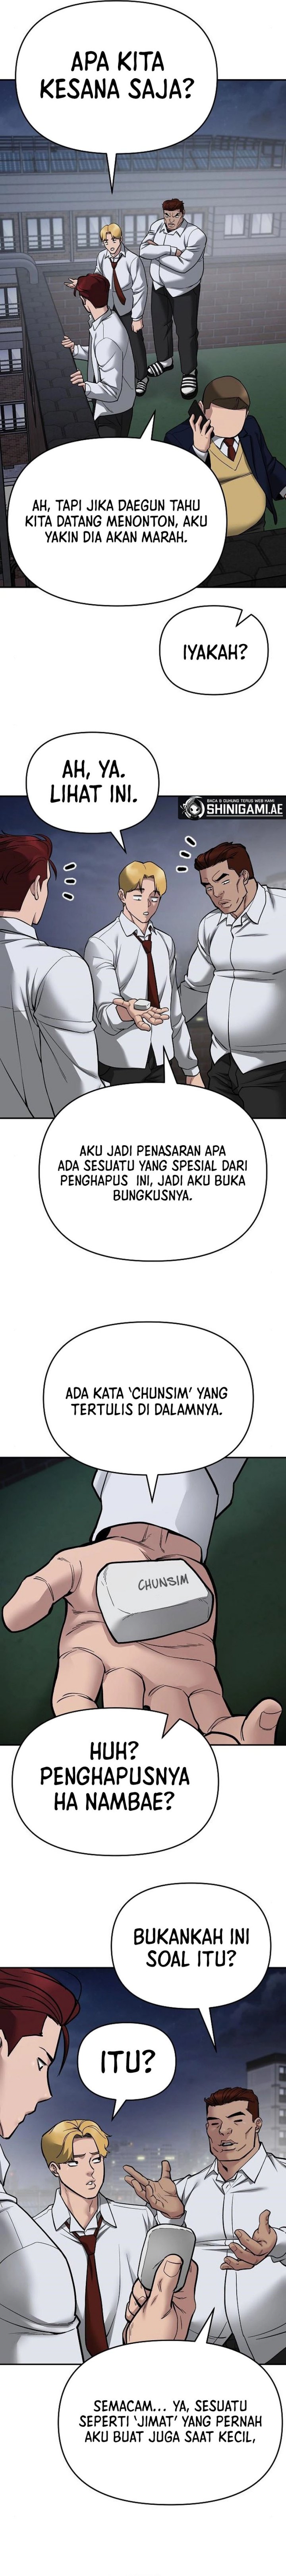 The Bully In Charge Chapter 74